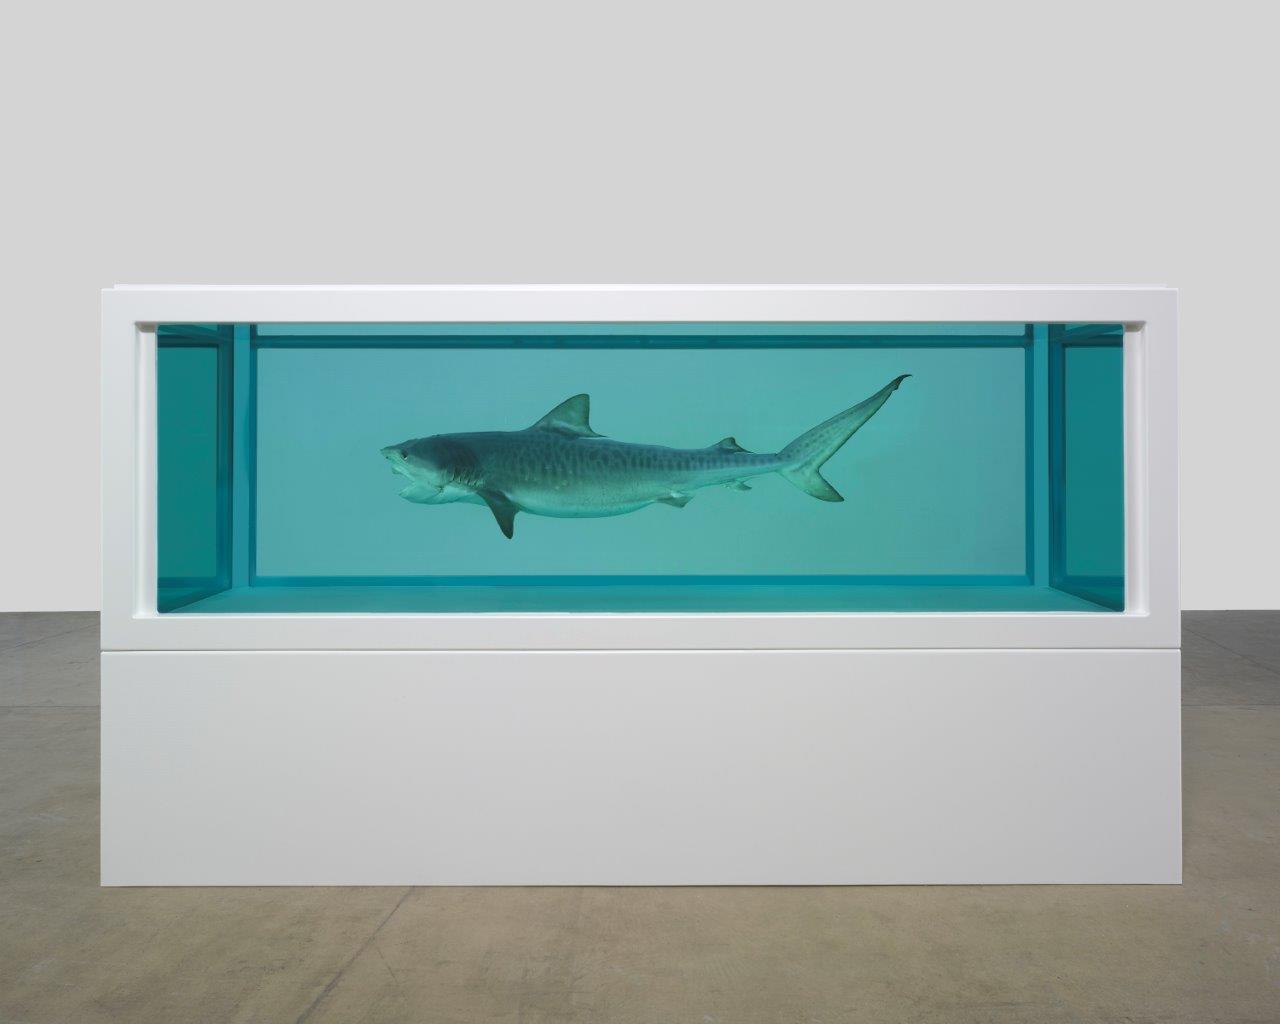 Heaven by Damien Hirst